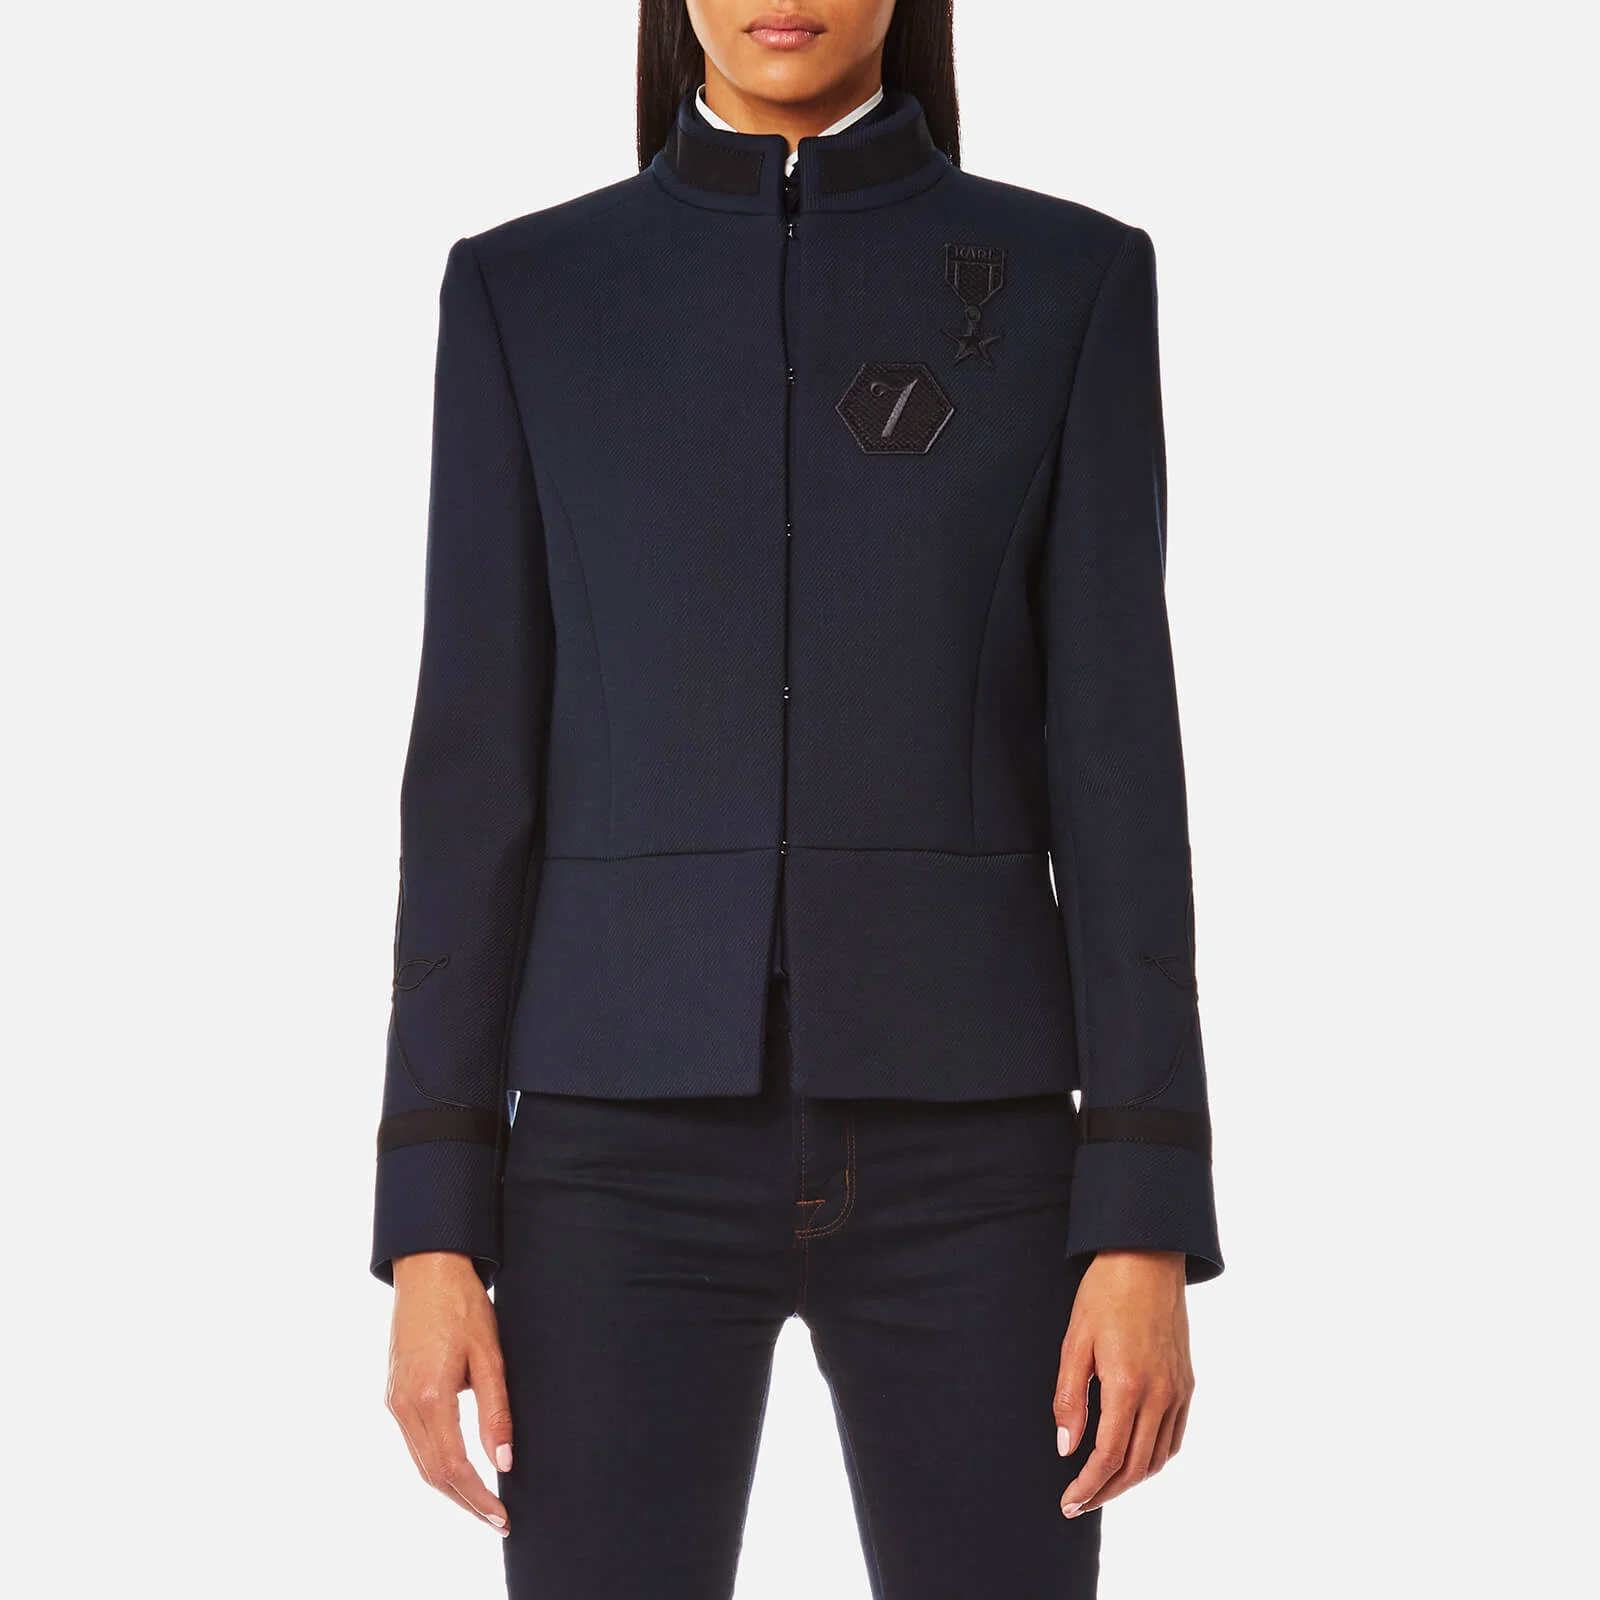 Karl Lagerfeld Women's Military Jacket with Patches - Peacoat Image 1